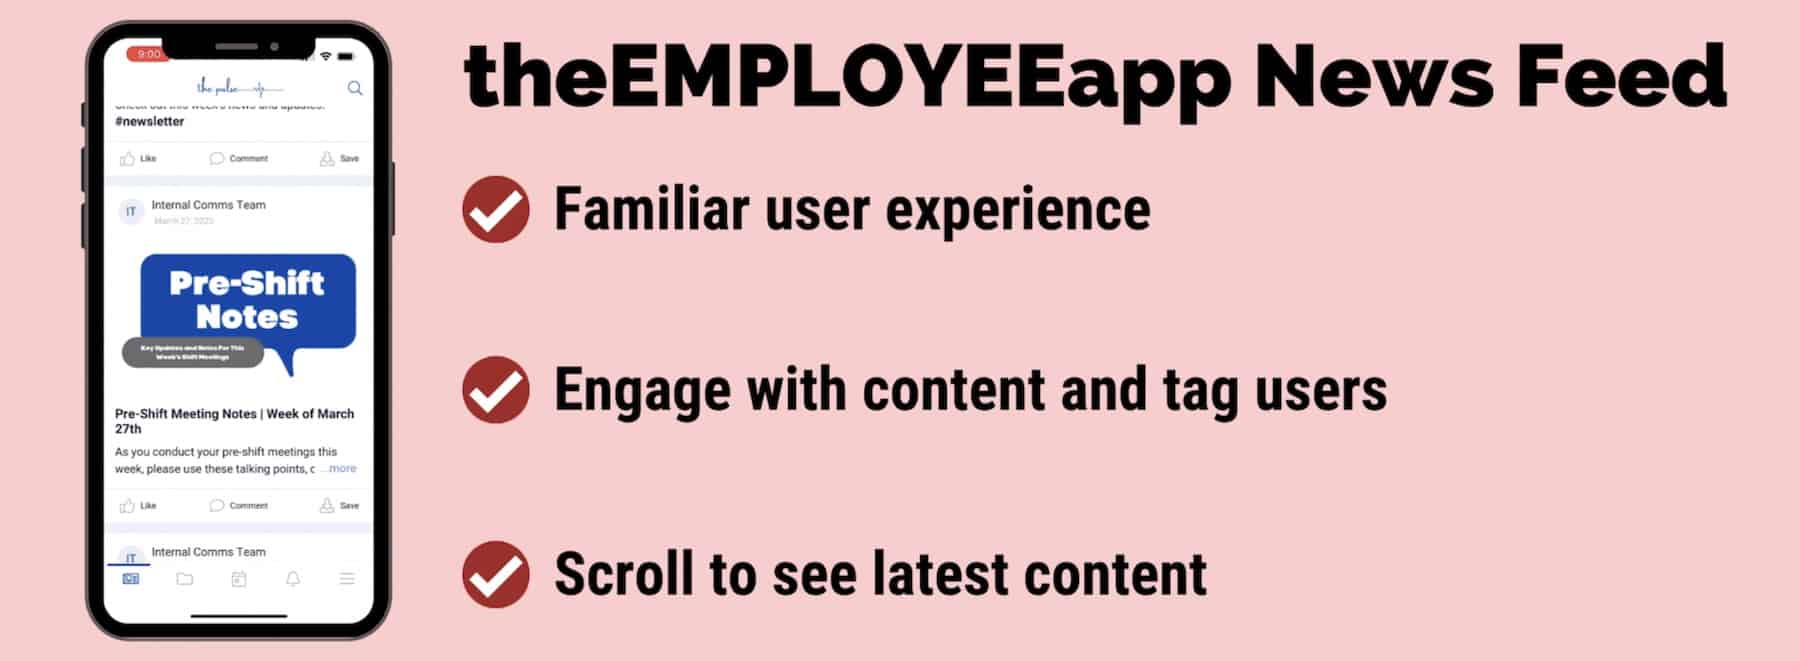 theEMPLOYEEapp News Feed: - Familiar User Experience - Engage with content and tag users -Scroll to see latest content